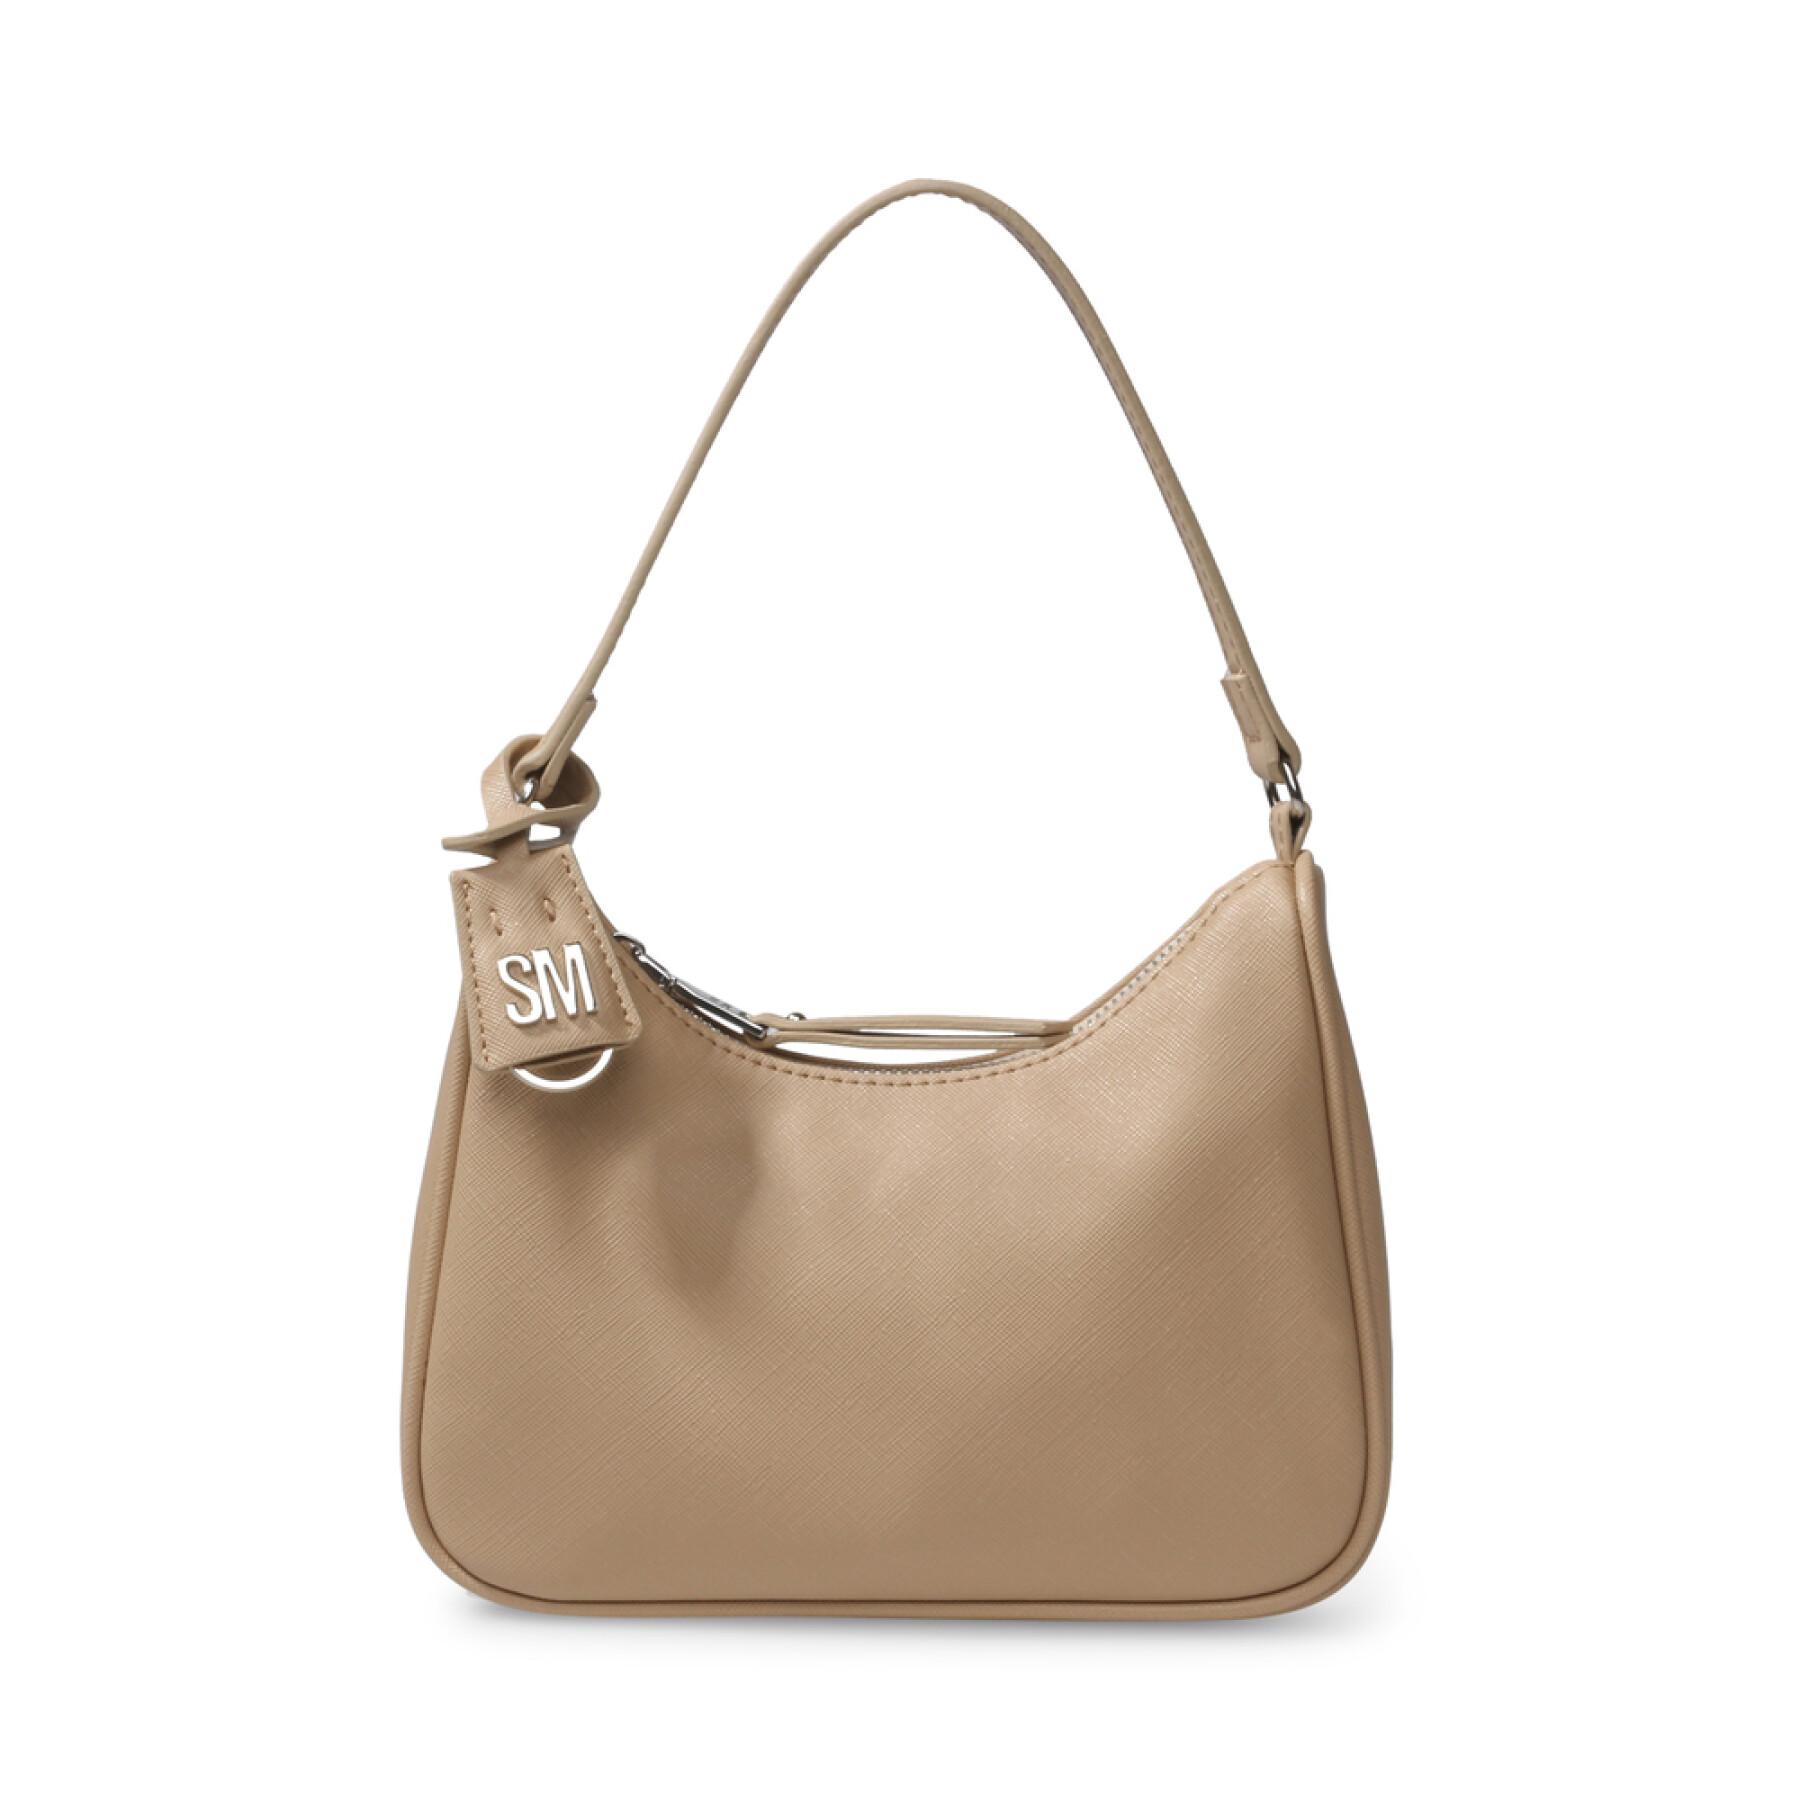 La Tropezienne  Timeless bags, Bags, Leather